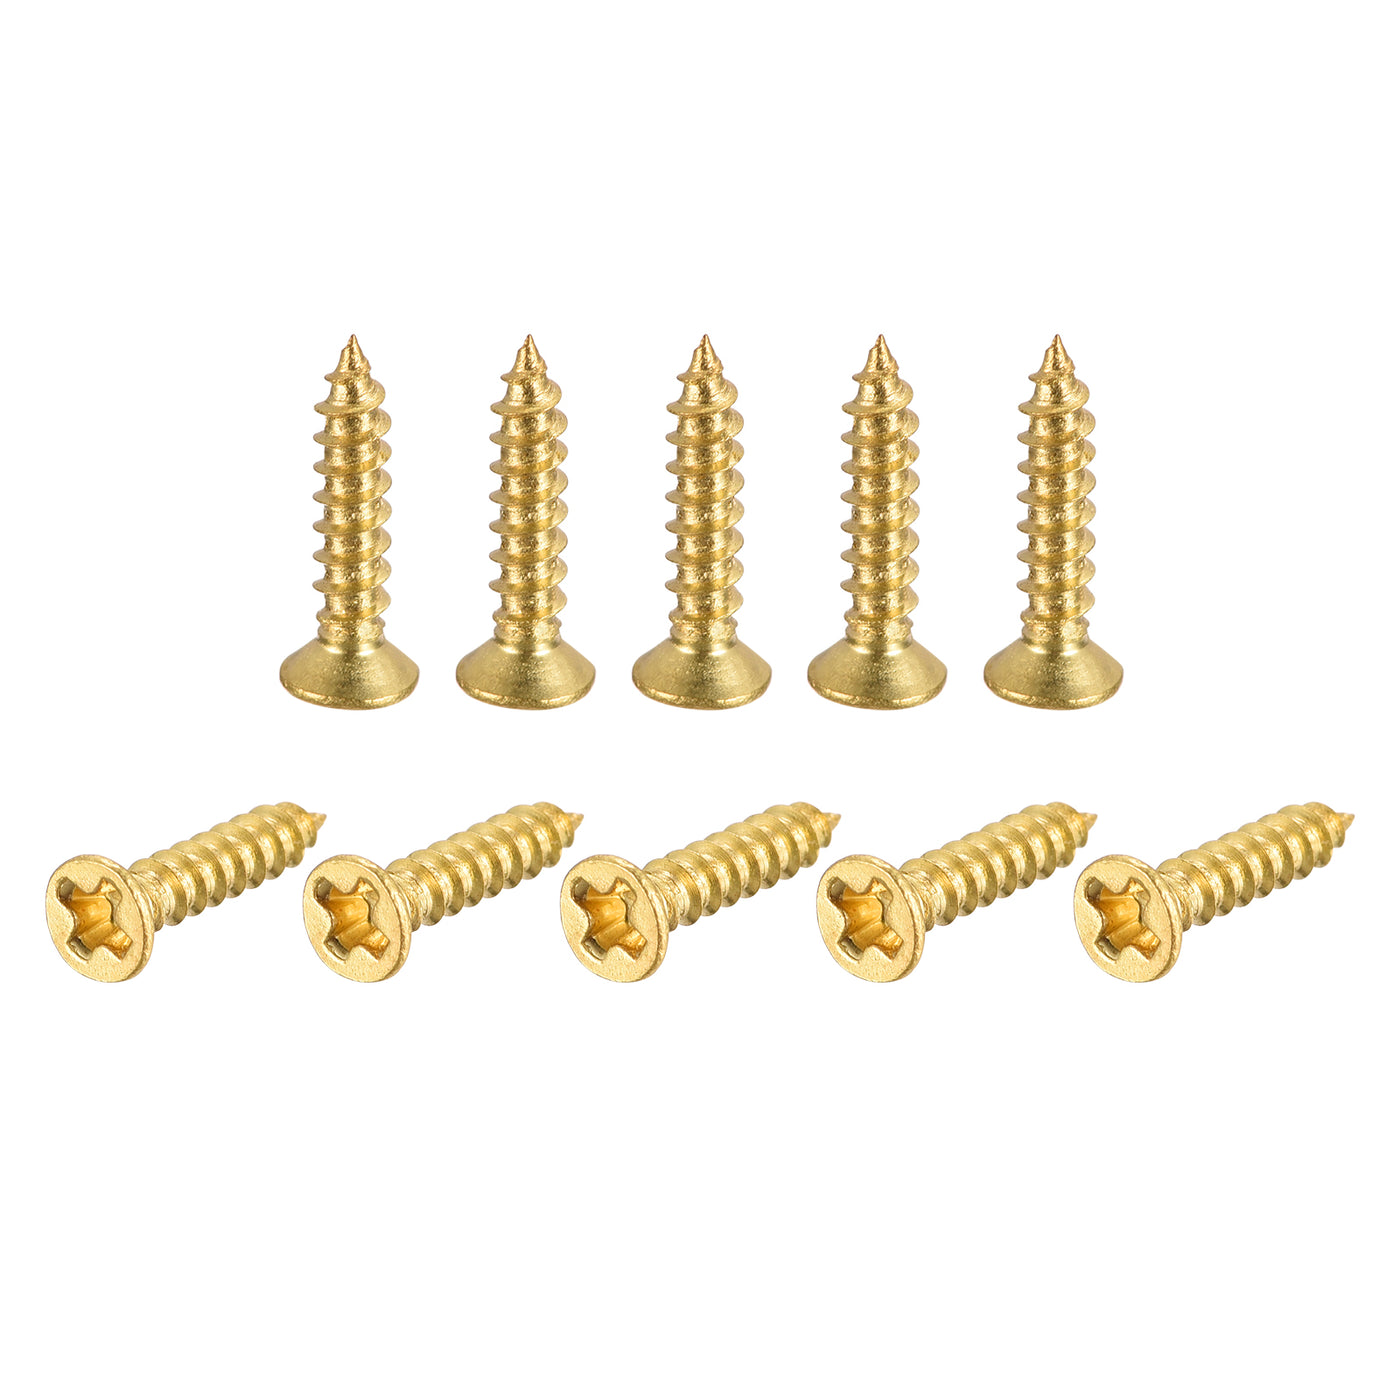 uxcell Uxcell Brass Wood Screws, M2x10mm Phillips Flat Head Self Tapping Connector for Door, Cabinet, Wooden Furniture 50Pcs